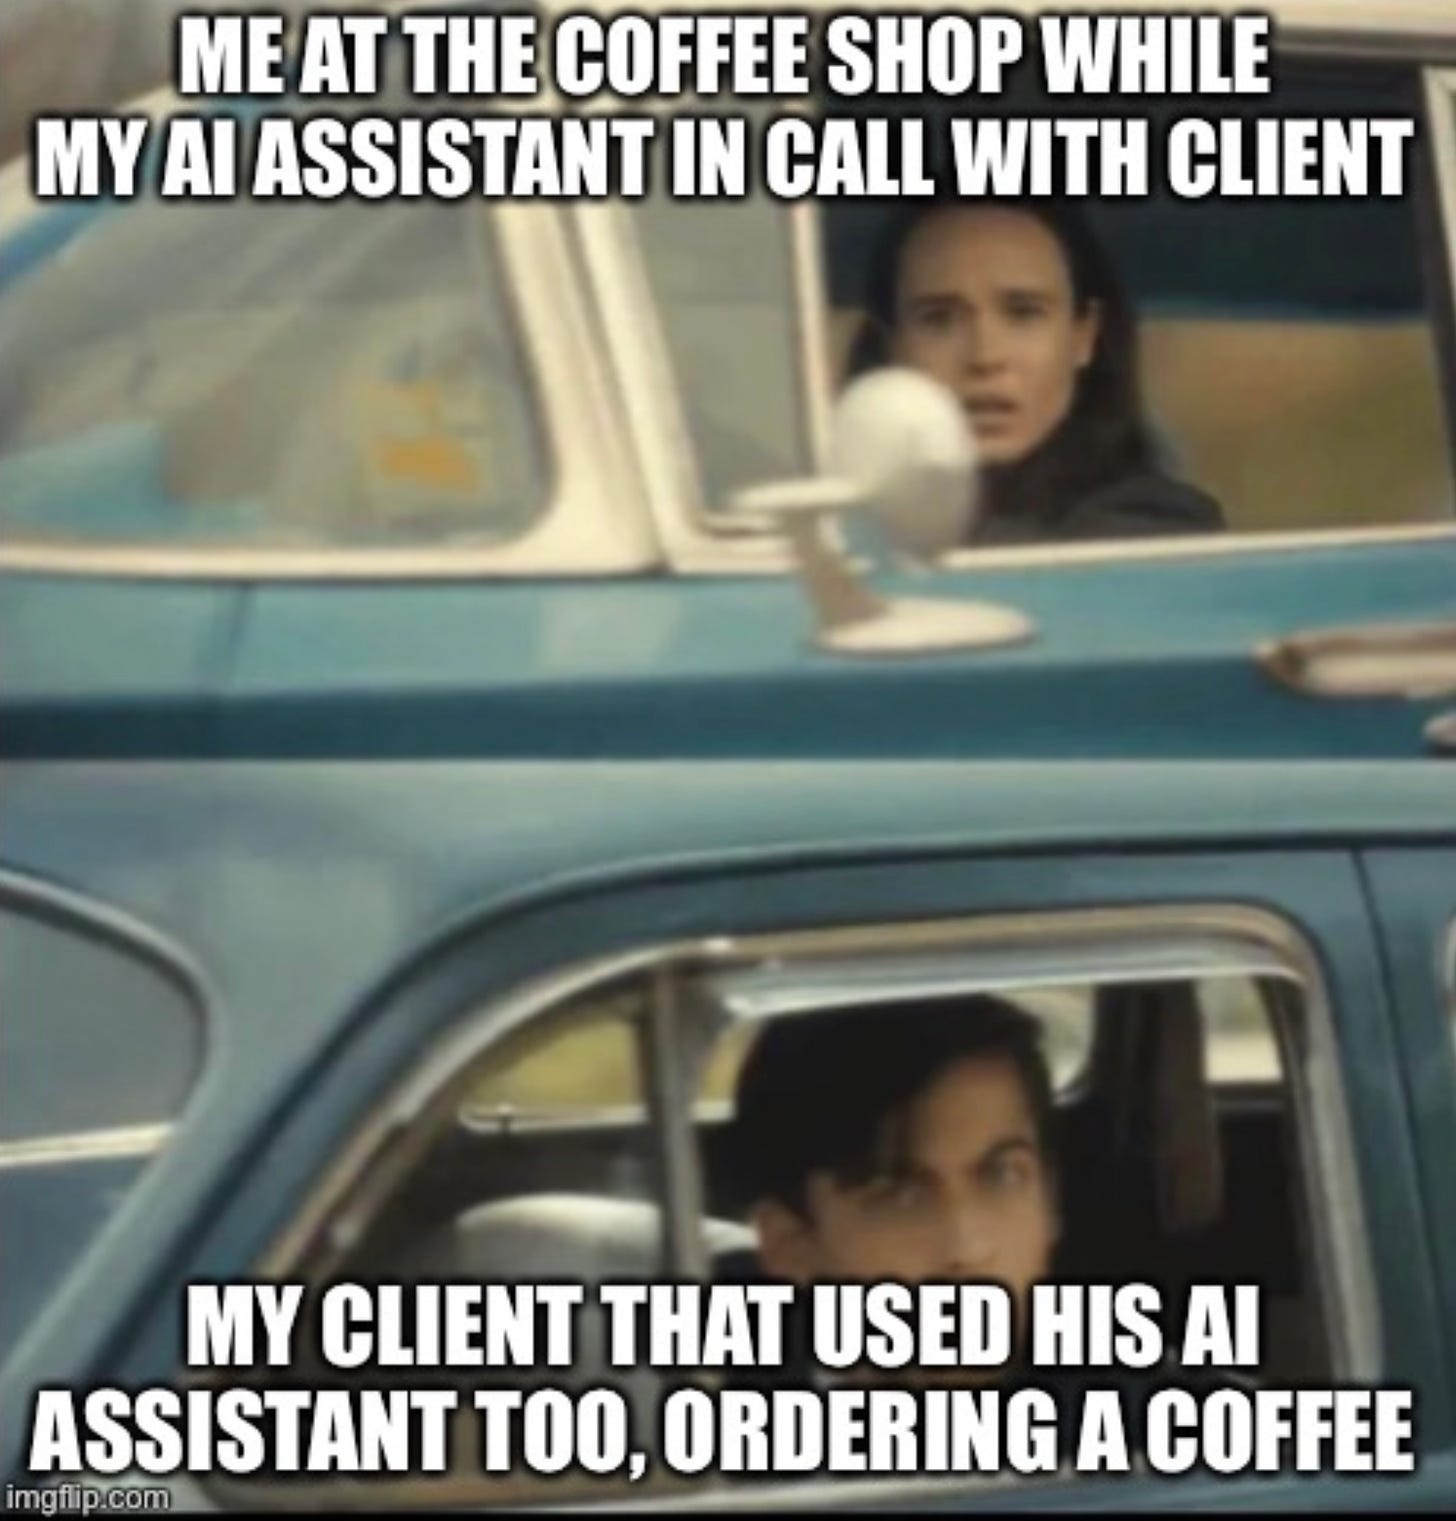 Meme saying "me at the coffee shop while my ai assistant in call with client, my client that used his ai assistant too ordering a coffee’